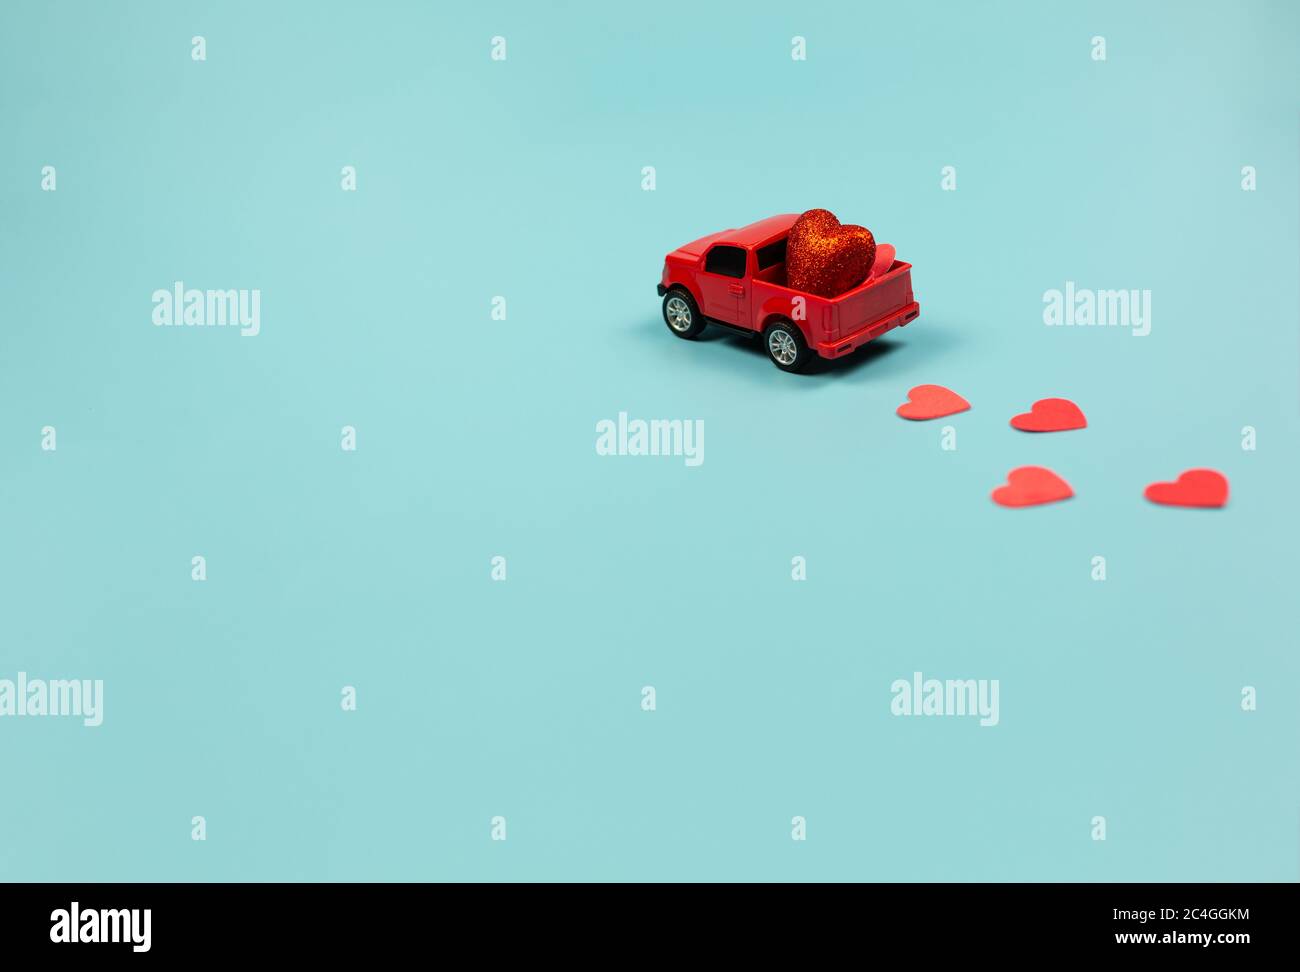 Valentines Day Concept. Miniature red toy car with red hearts Stock Photo